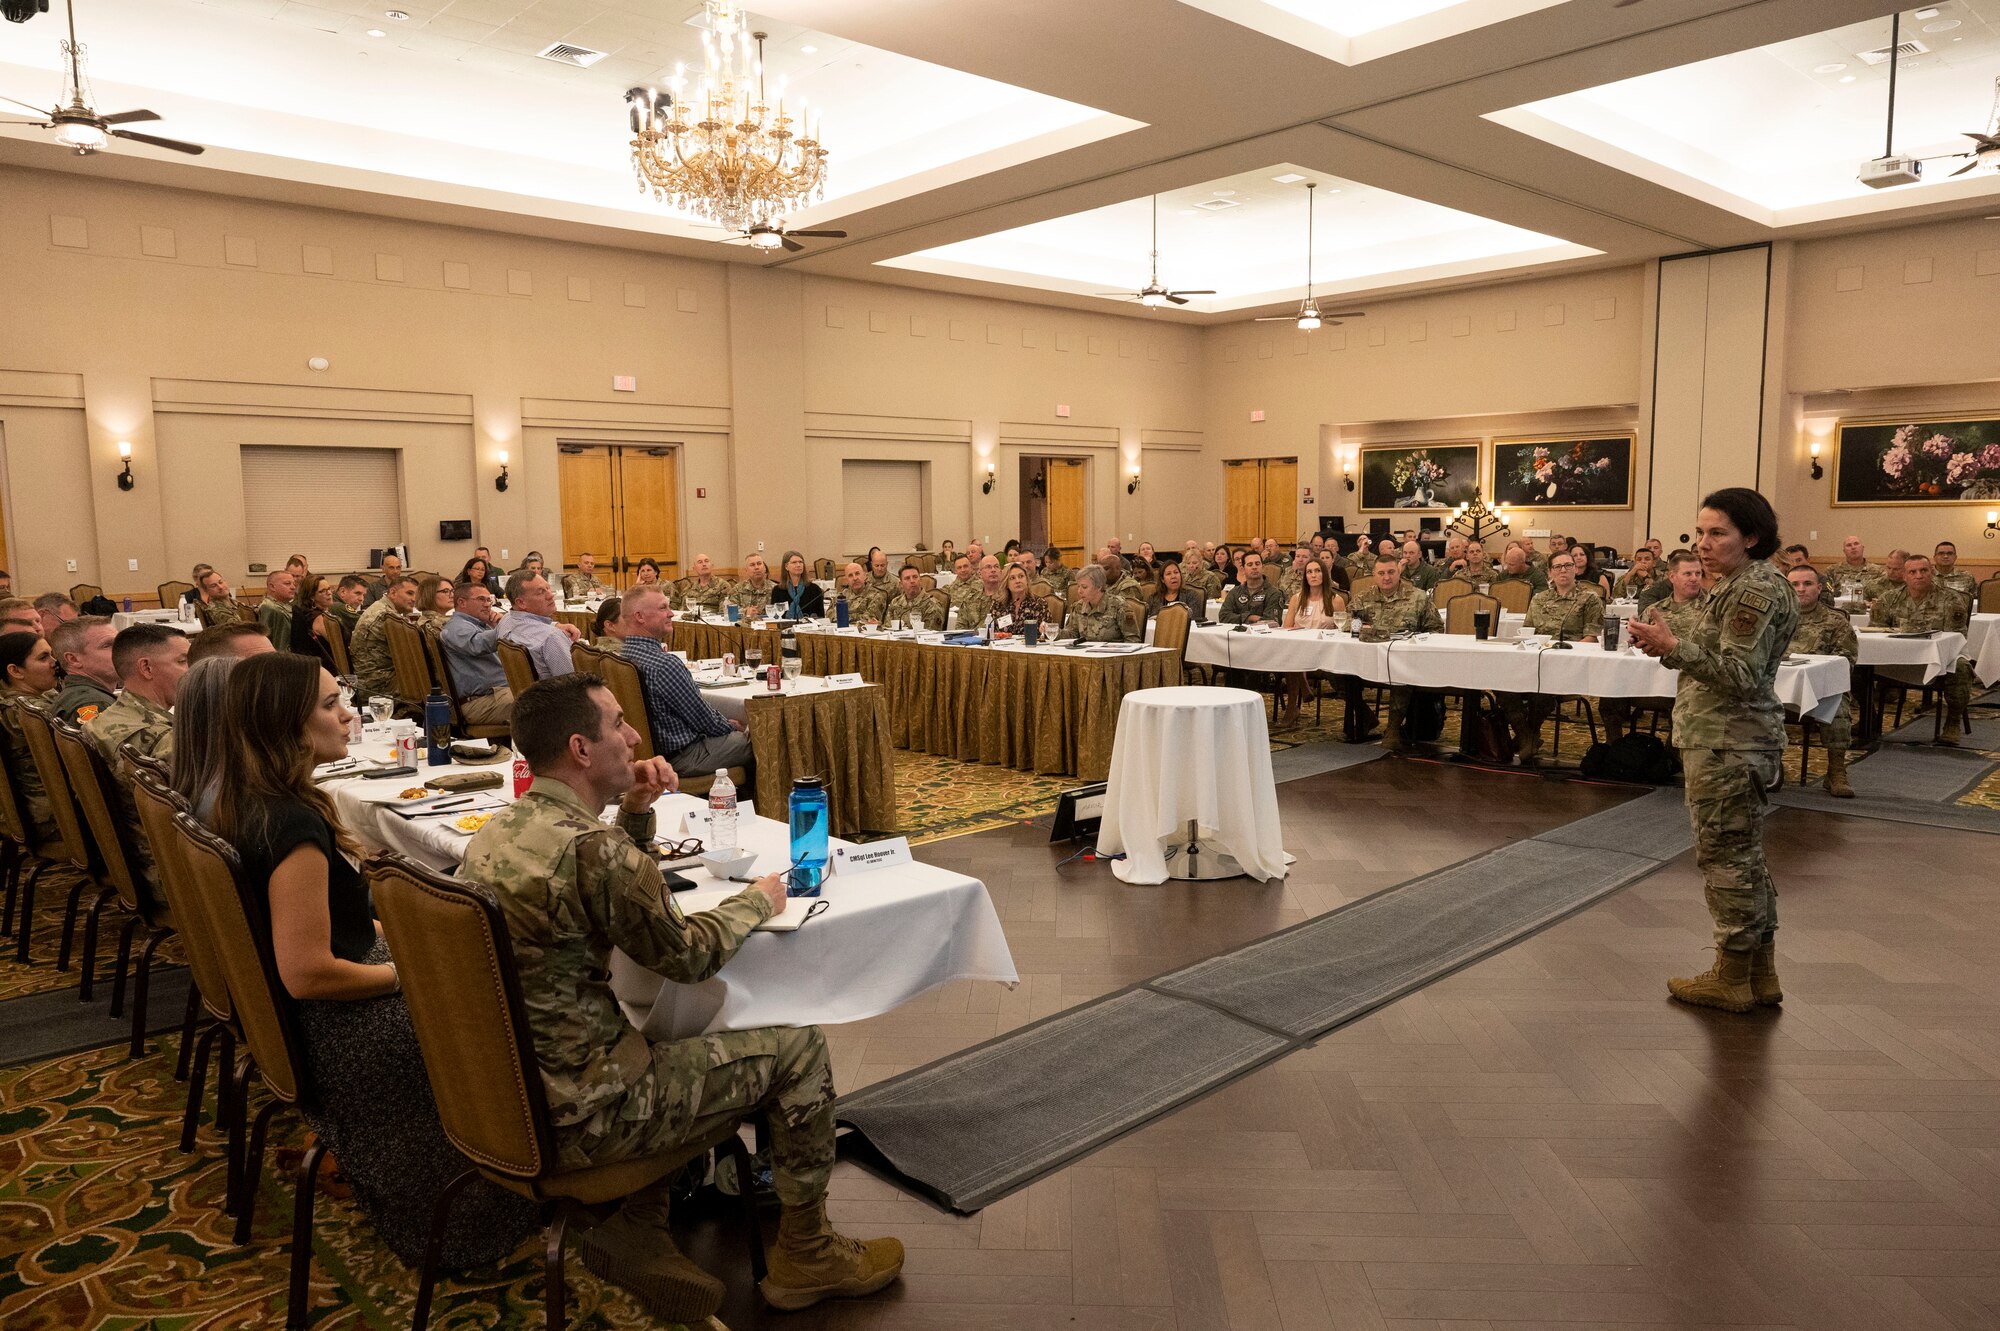 U.S. Air Force Big. Gen. Jeannine Ryder, commander of the 59th Medical Wing, gives a briefing on the military health system transformation during Air Education and Training Command's Gathering of the Torch at Joint Base San Antonio-Lackland, Texas, Nov. 9, 2022.